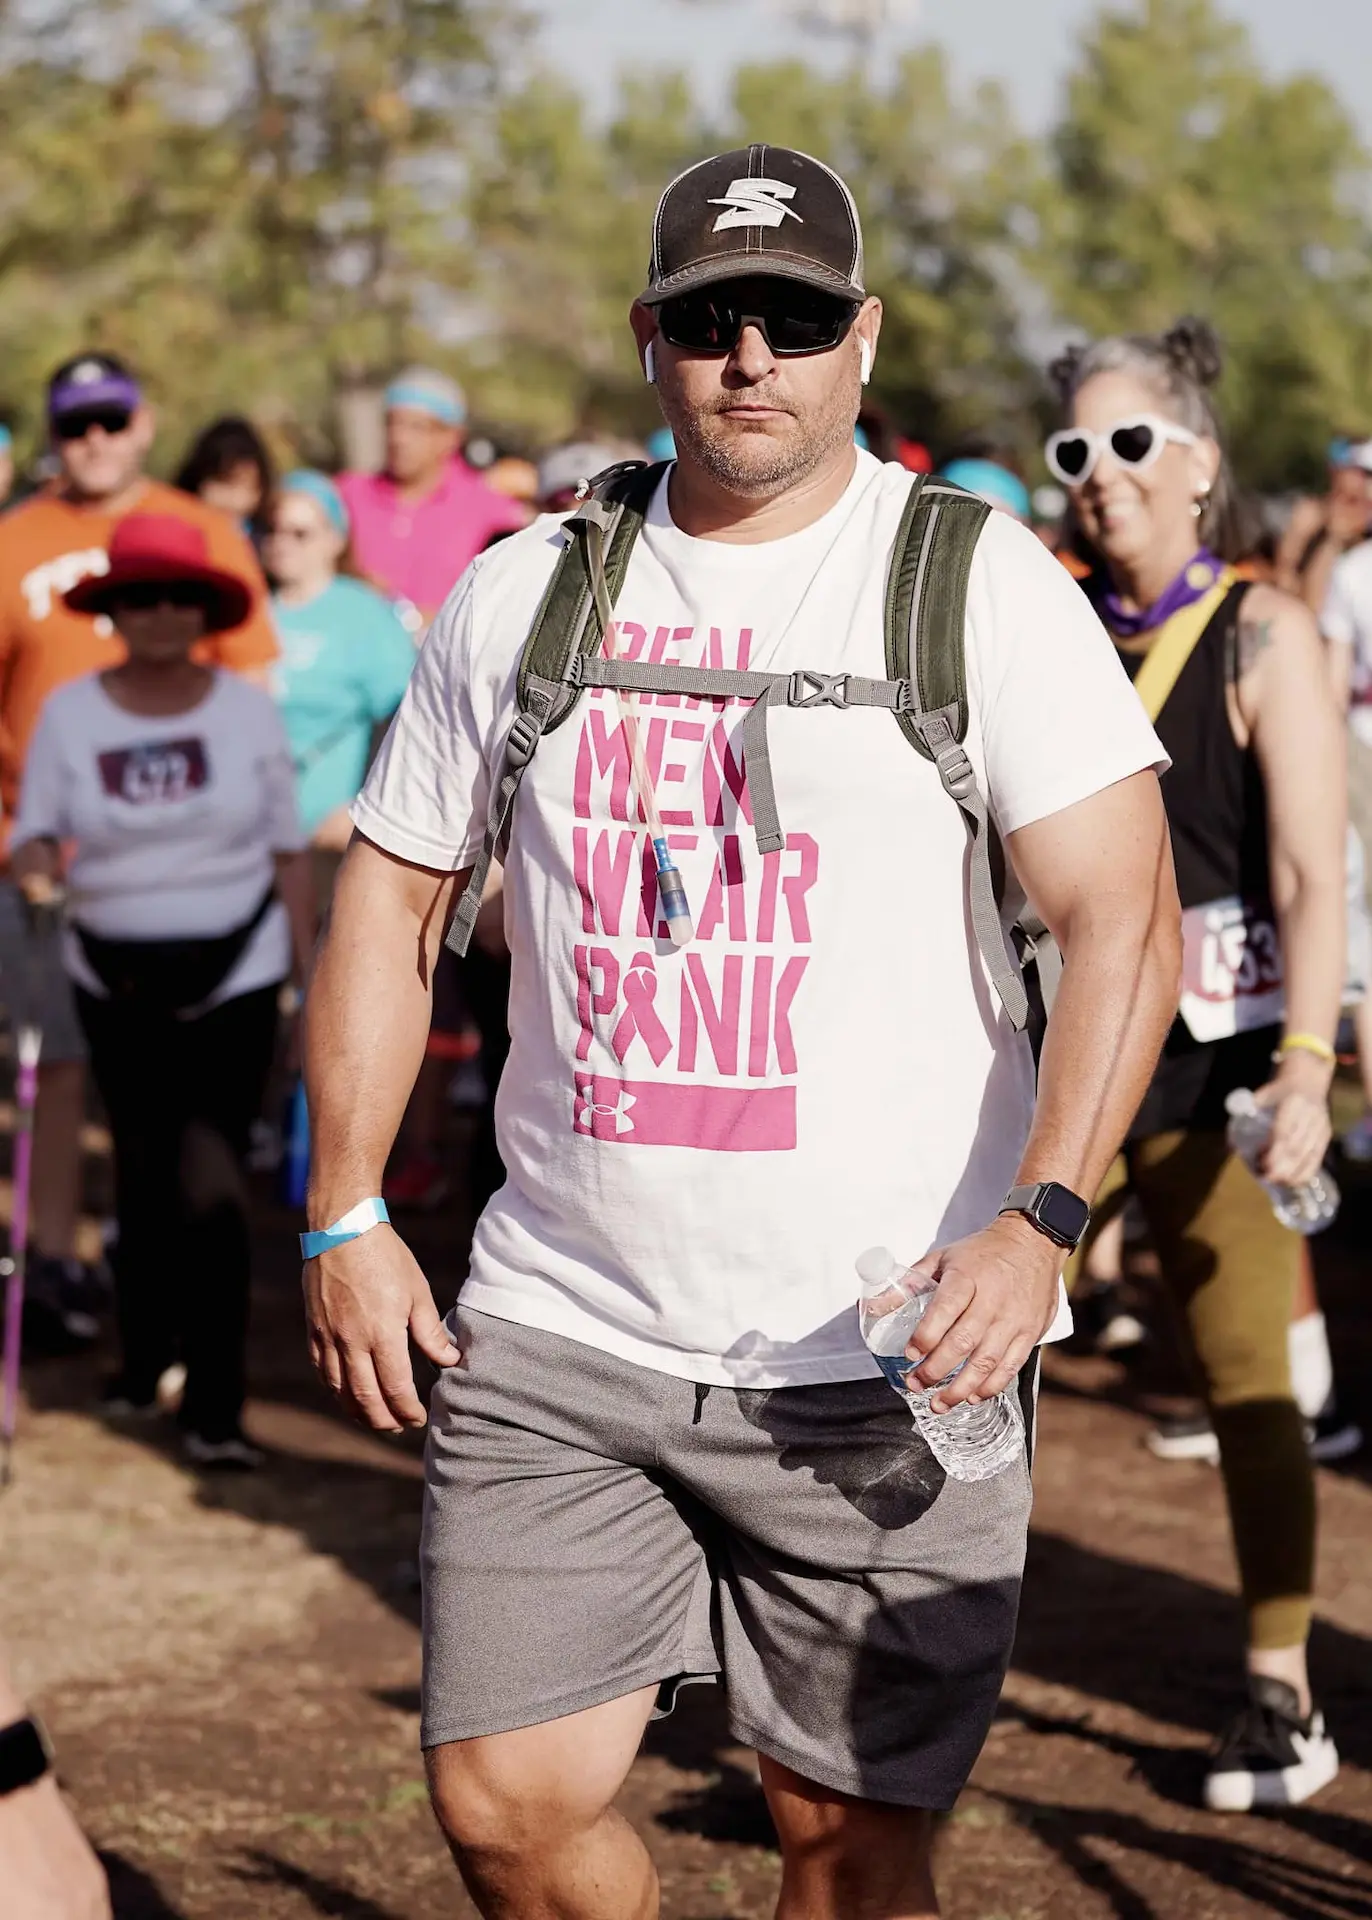 A man wearing a backpack and a real men wear pink shirt as he participates in Kern Run Walk